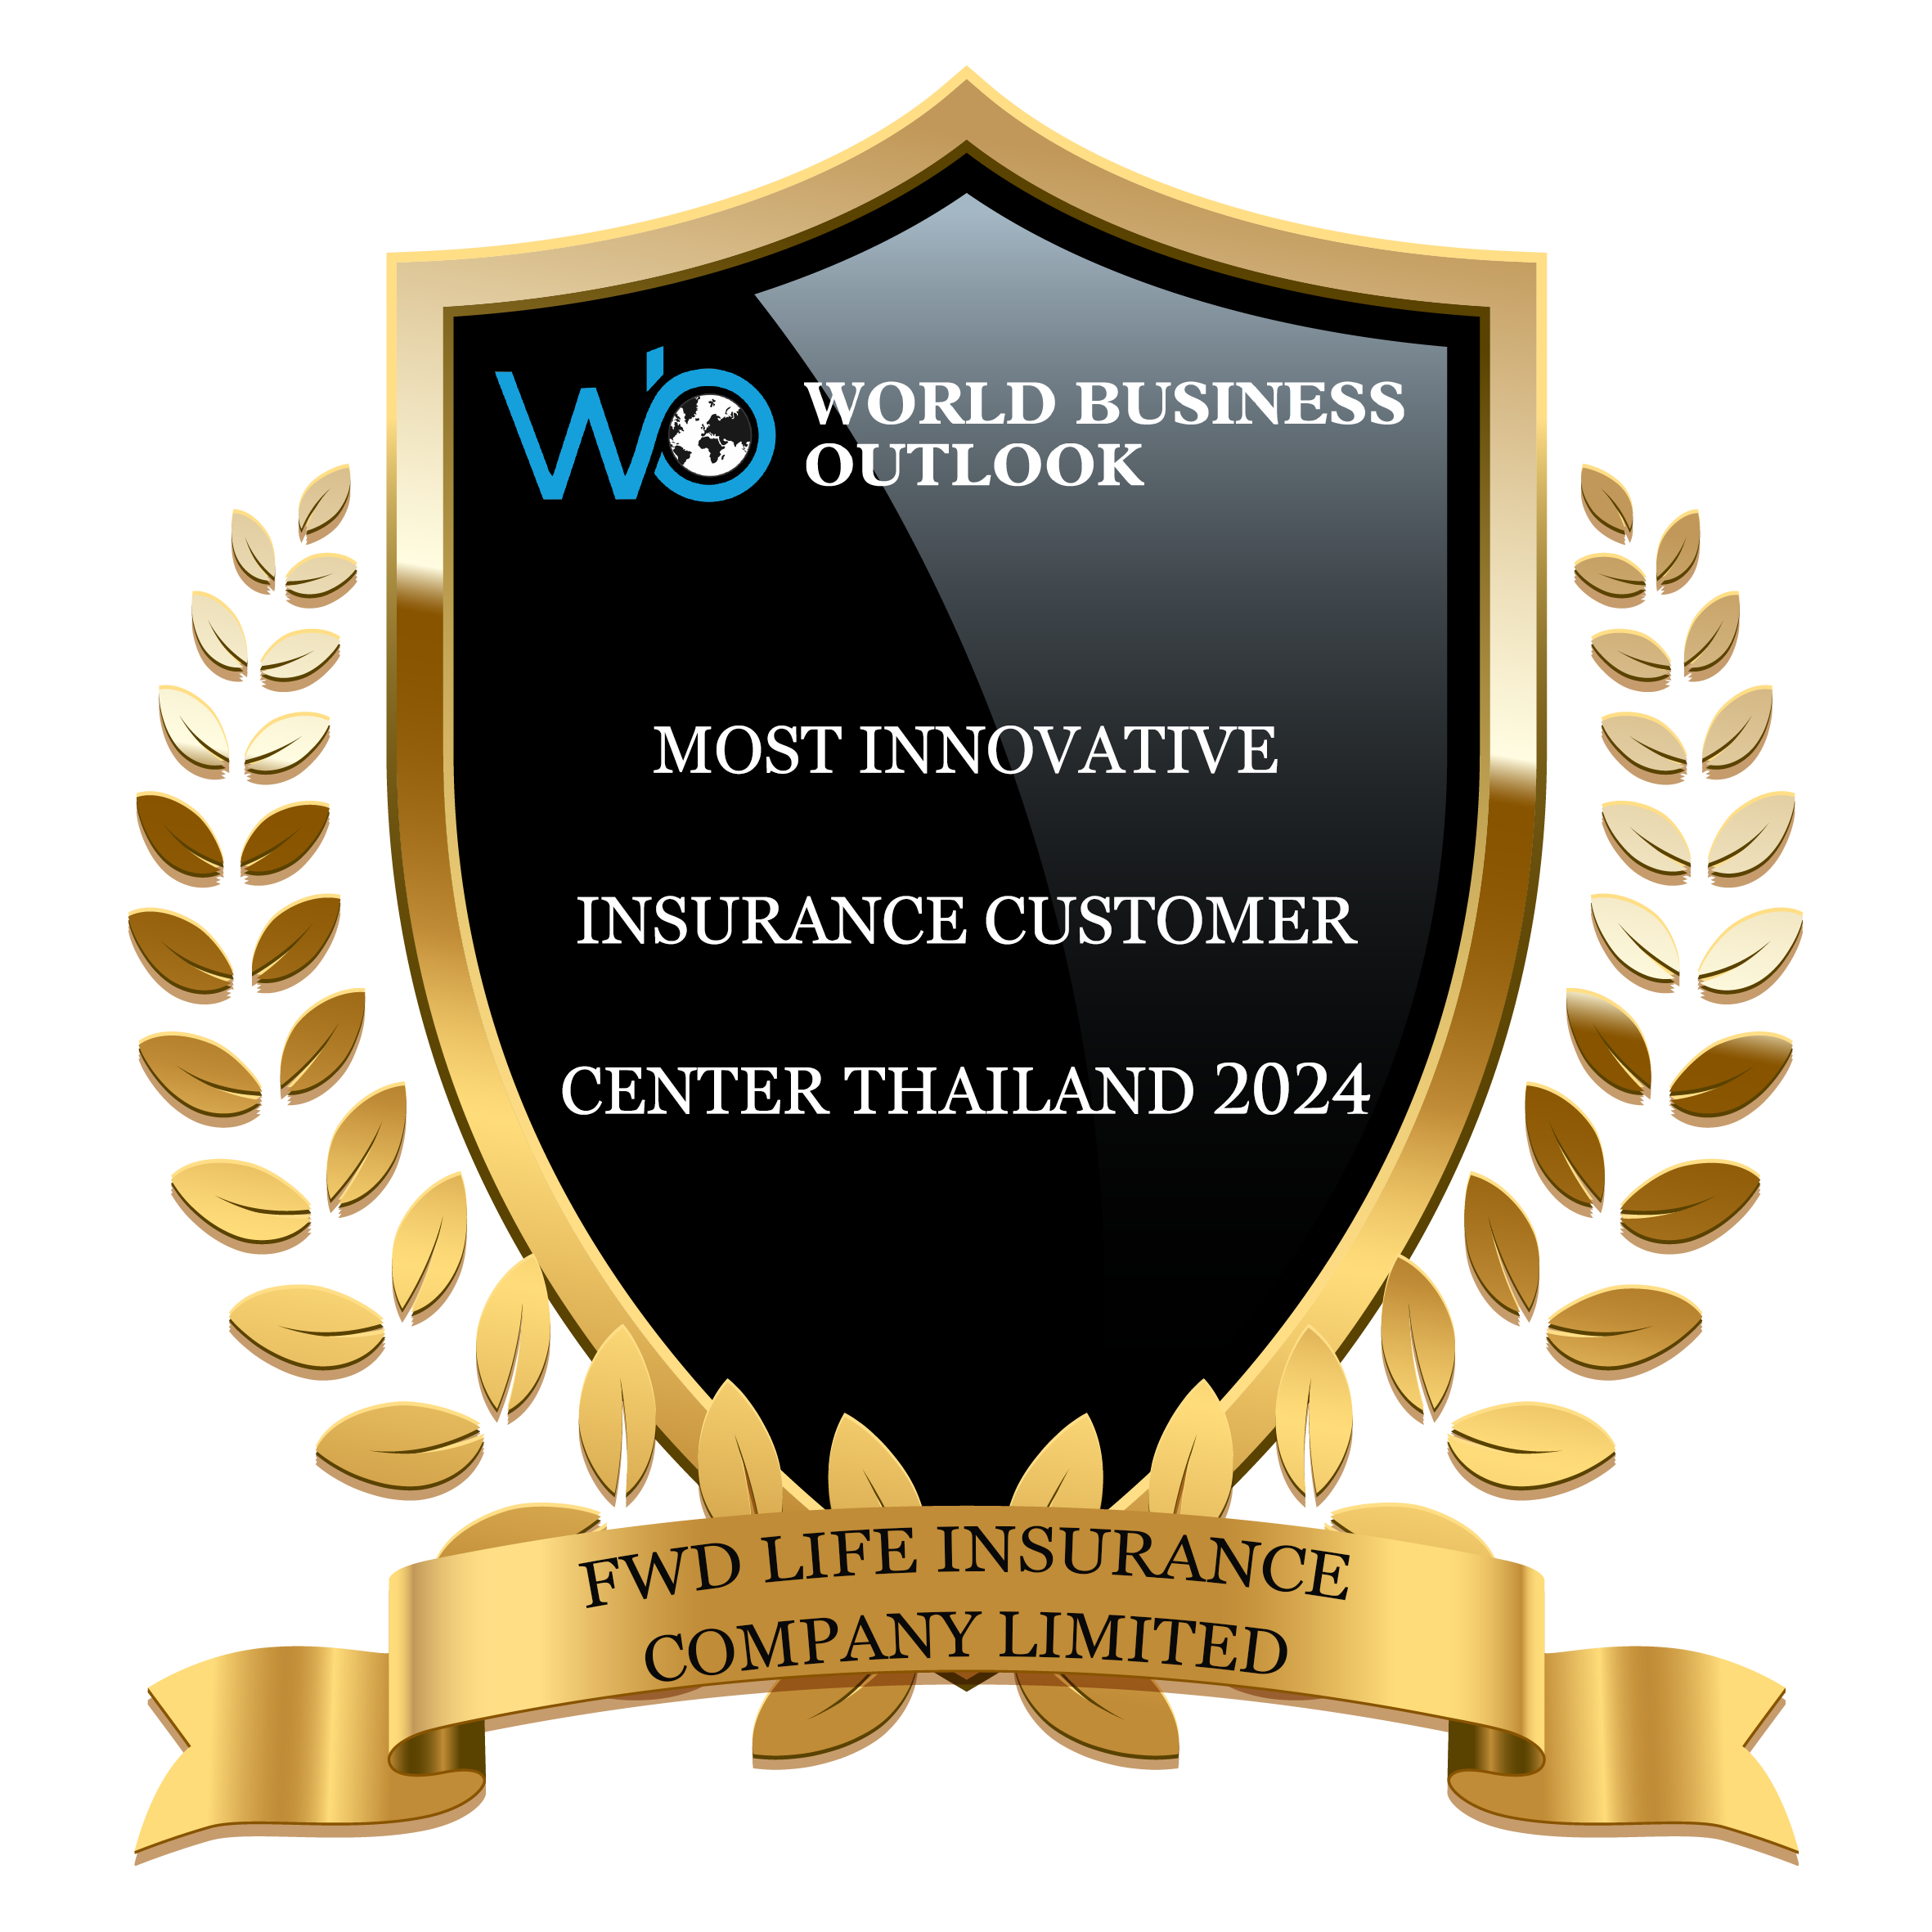 Thailand's insurance leader, FWD Life Insurance, bags the prestigious title of "Most Innovative Insurance Customer Center Thailand 2024"